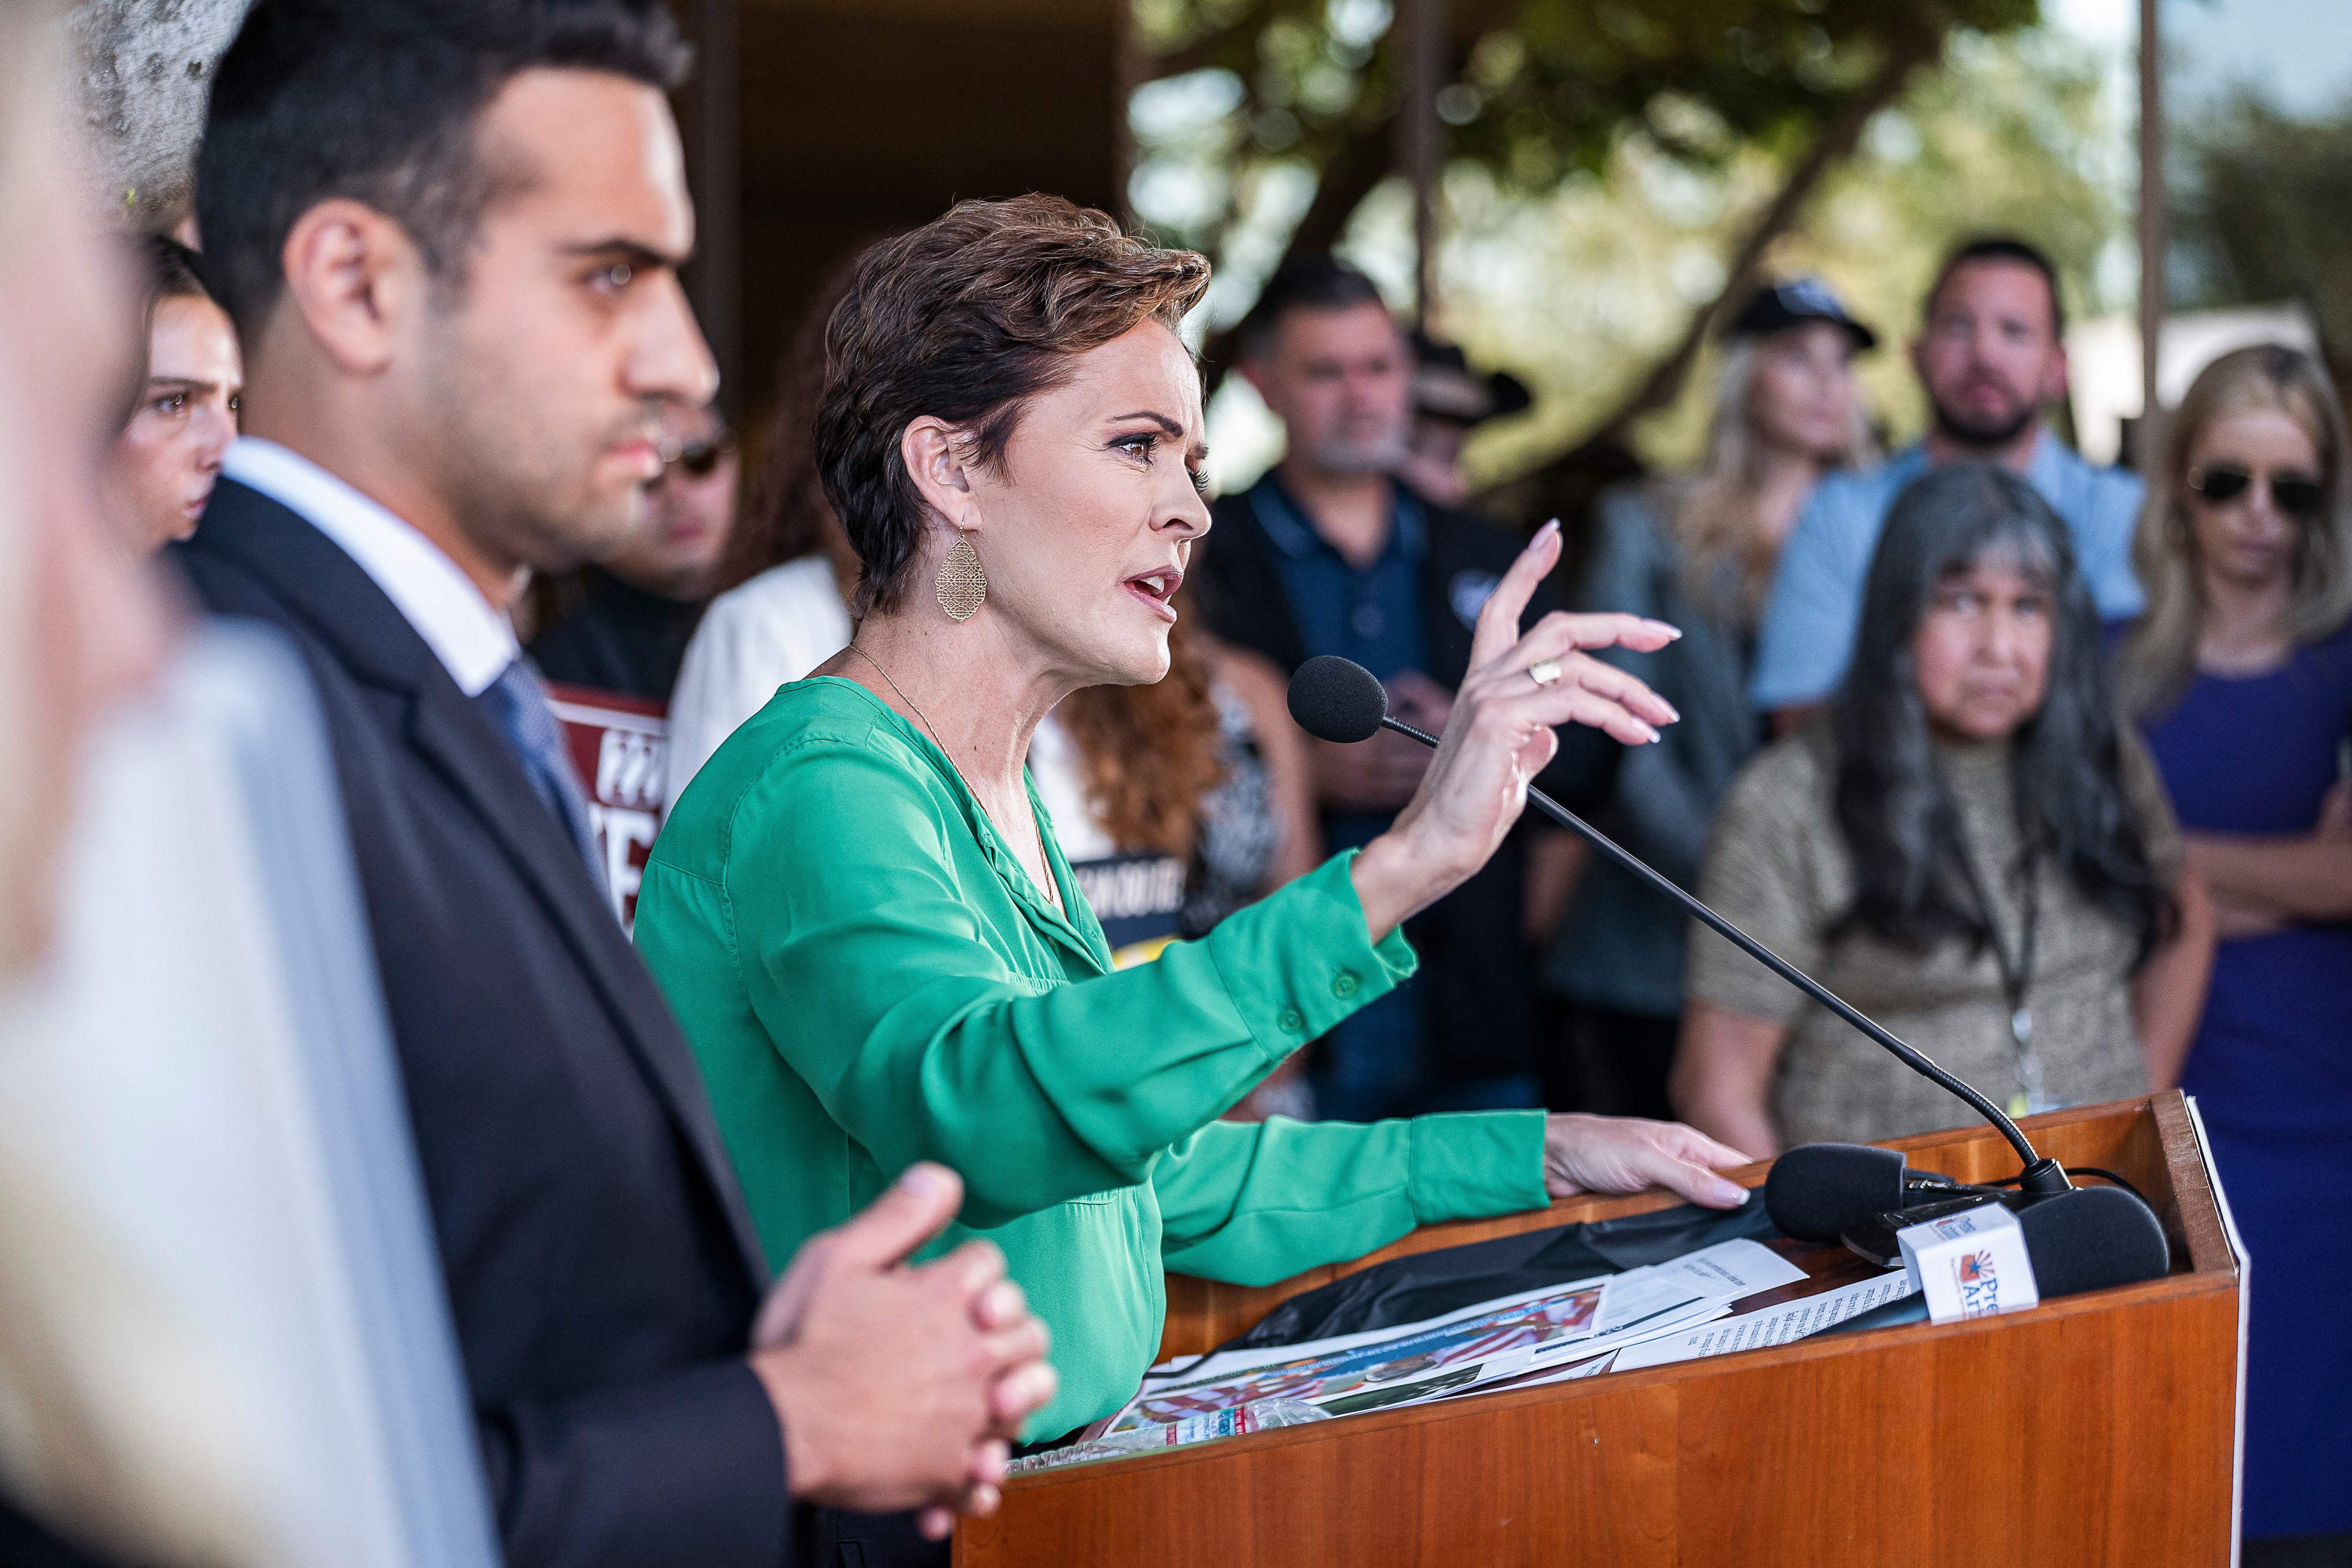 A woman speaks from a lectern while a man standing beside her looks out into a crowd 